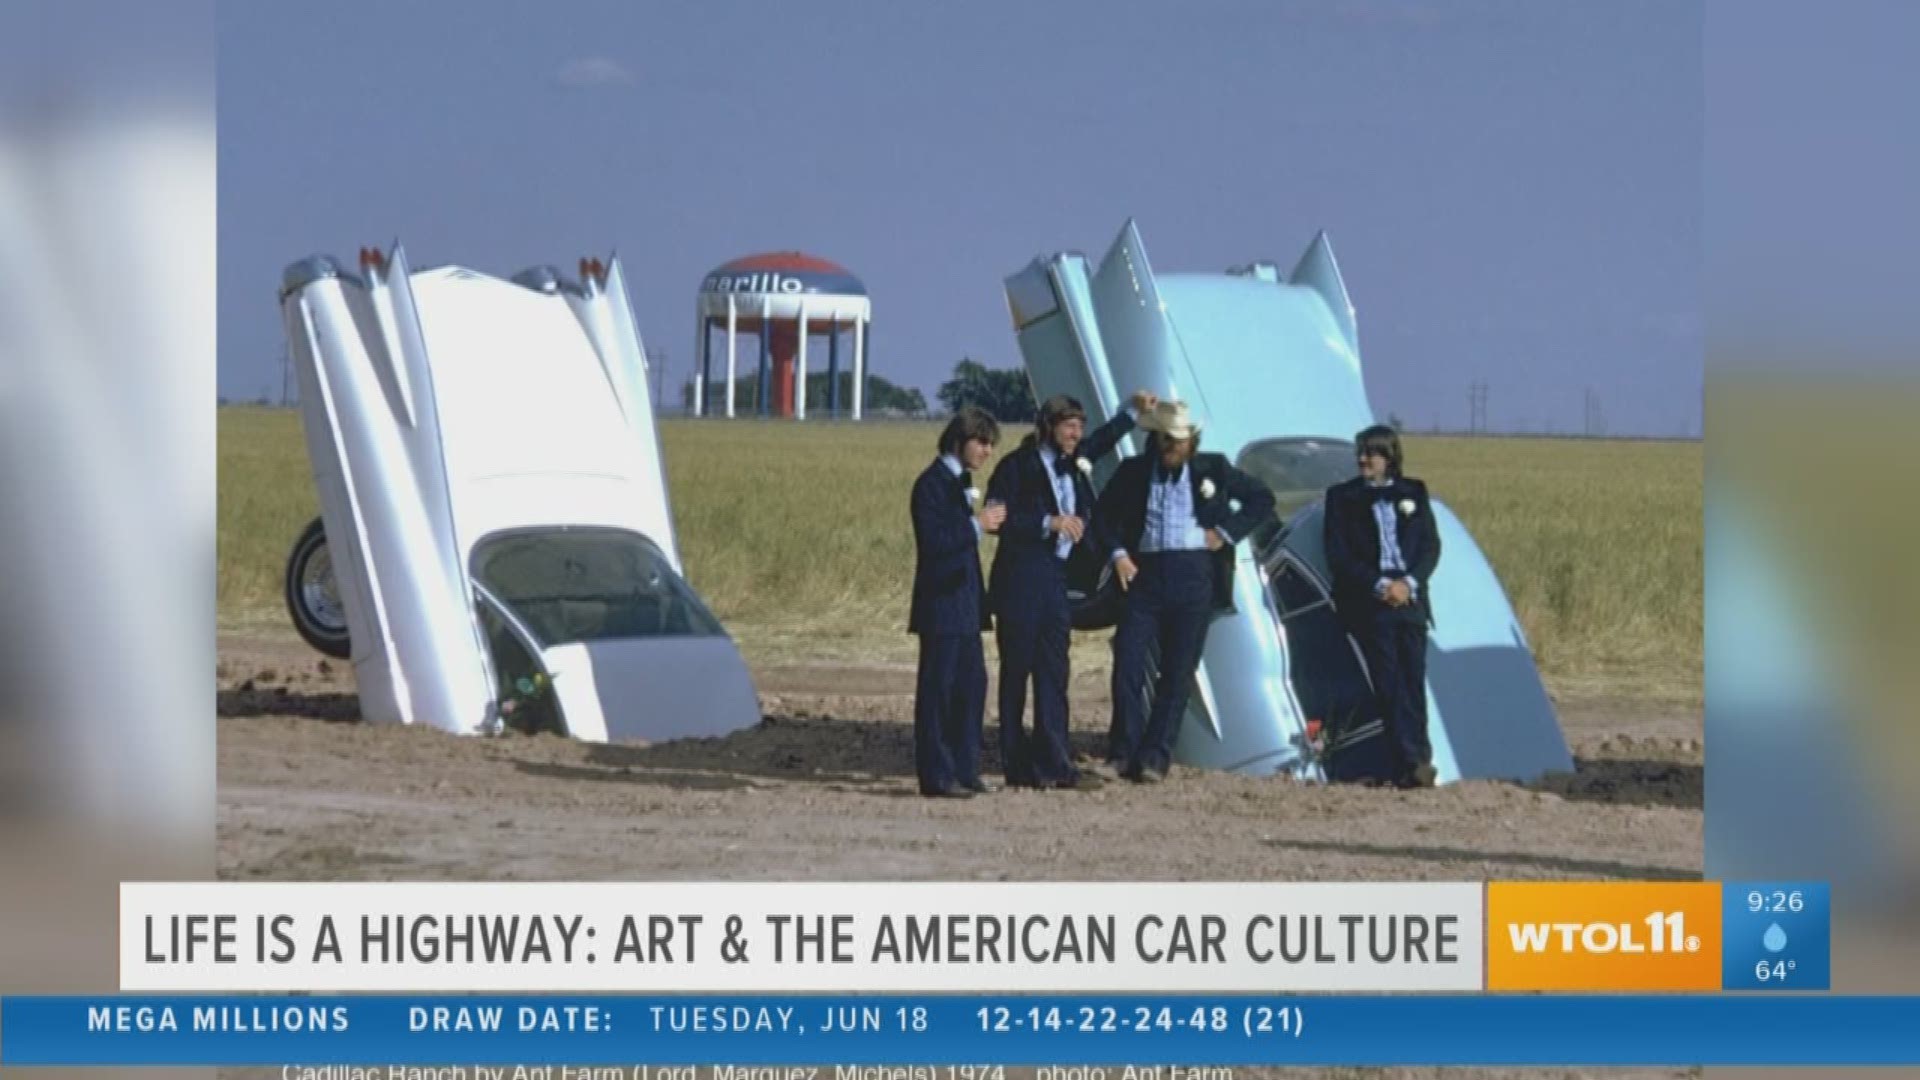 Check out some awesome cars at the Toledo Art Museum with the Life is a Highway: Art and the American Car Culture.